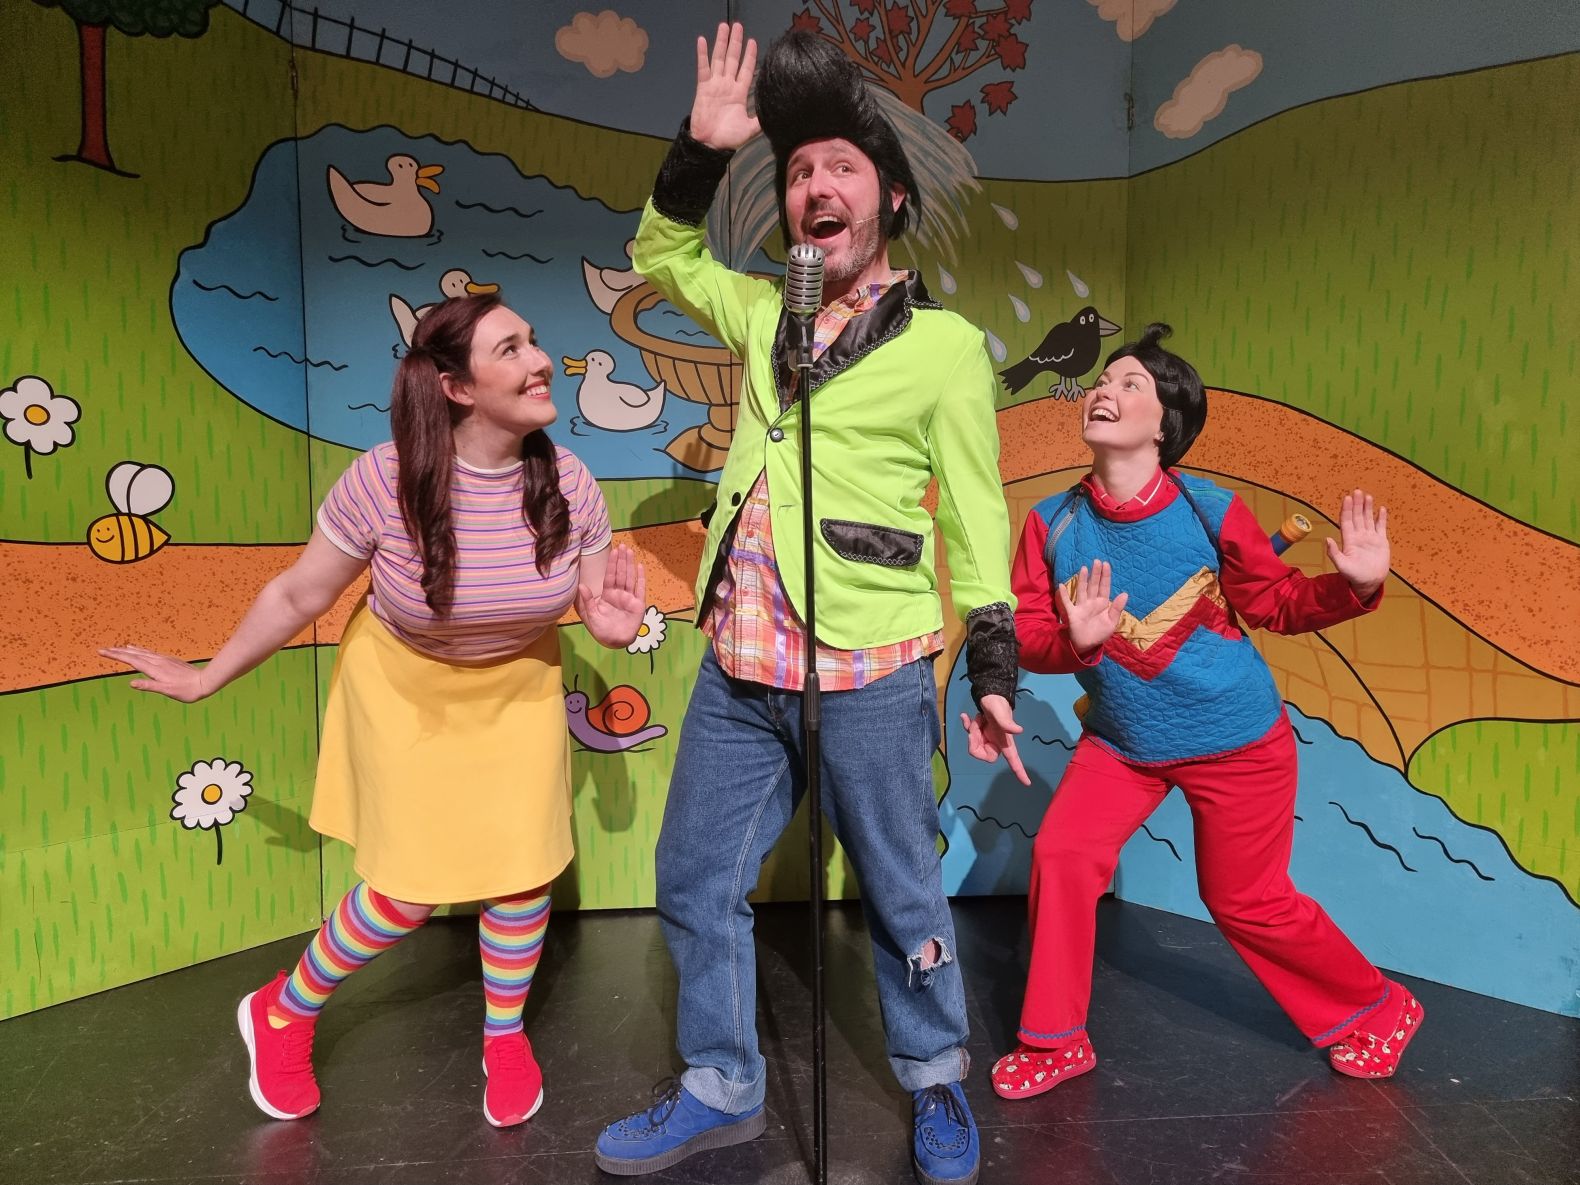 three cast members in mid-song - the central character has a large quiff